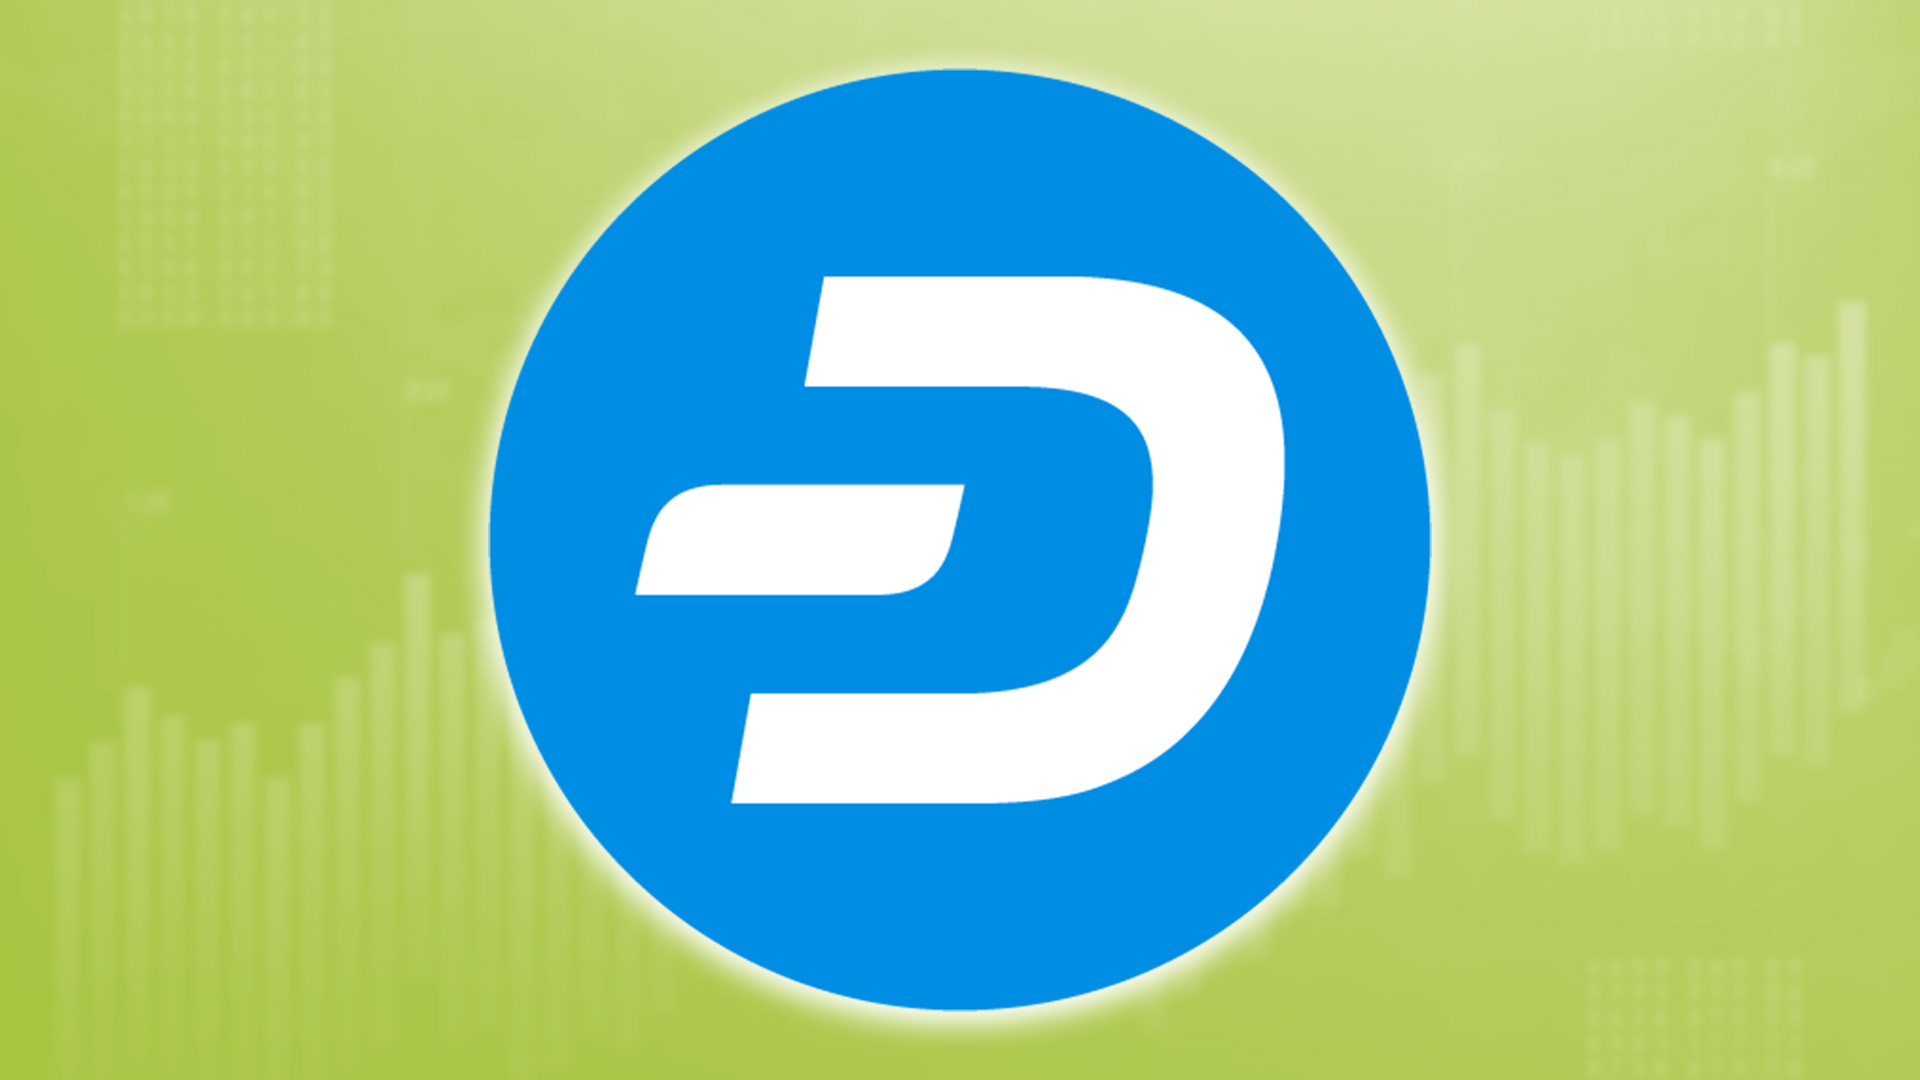 What is Dash? How it is Using POW to Enable Fast Transactions